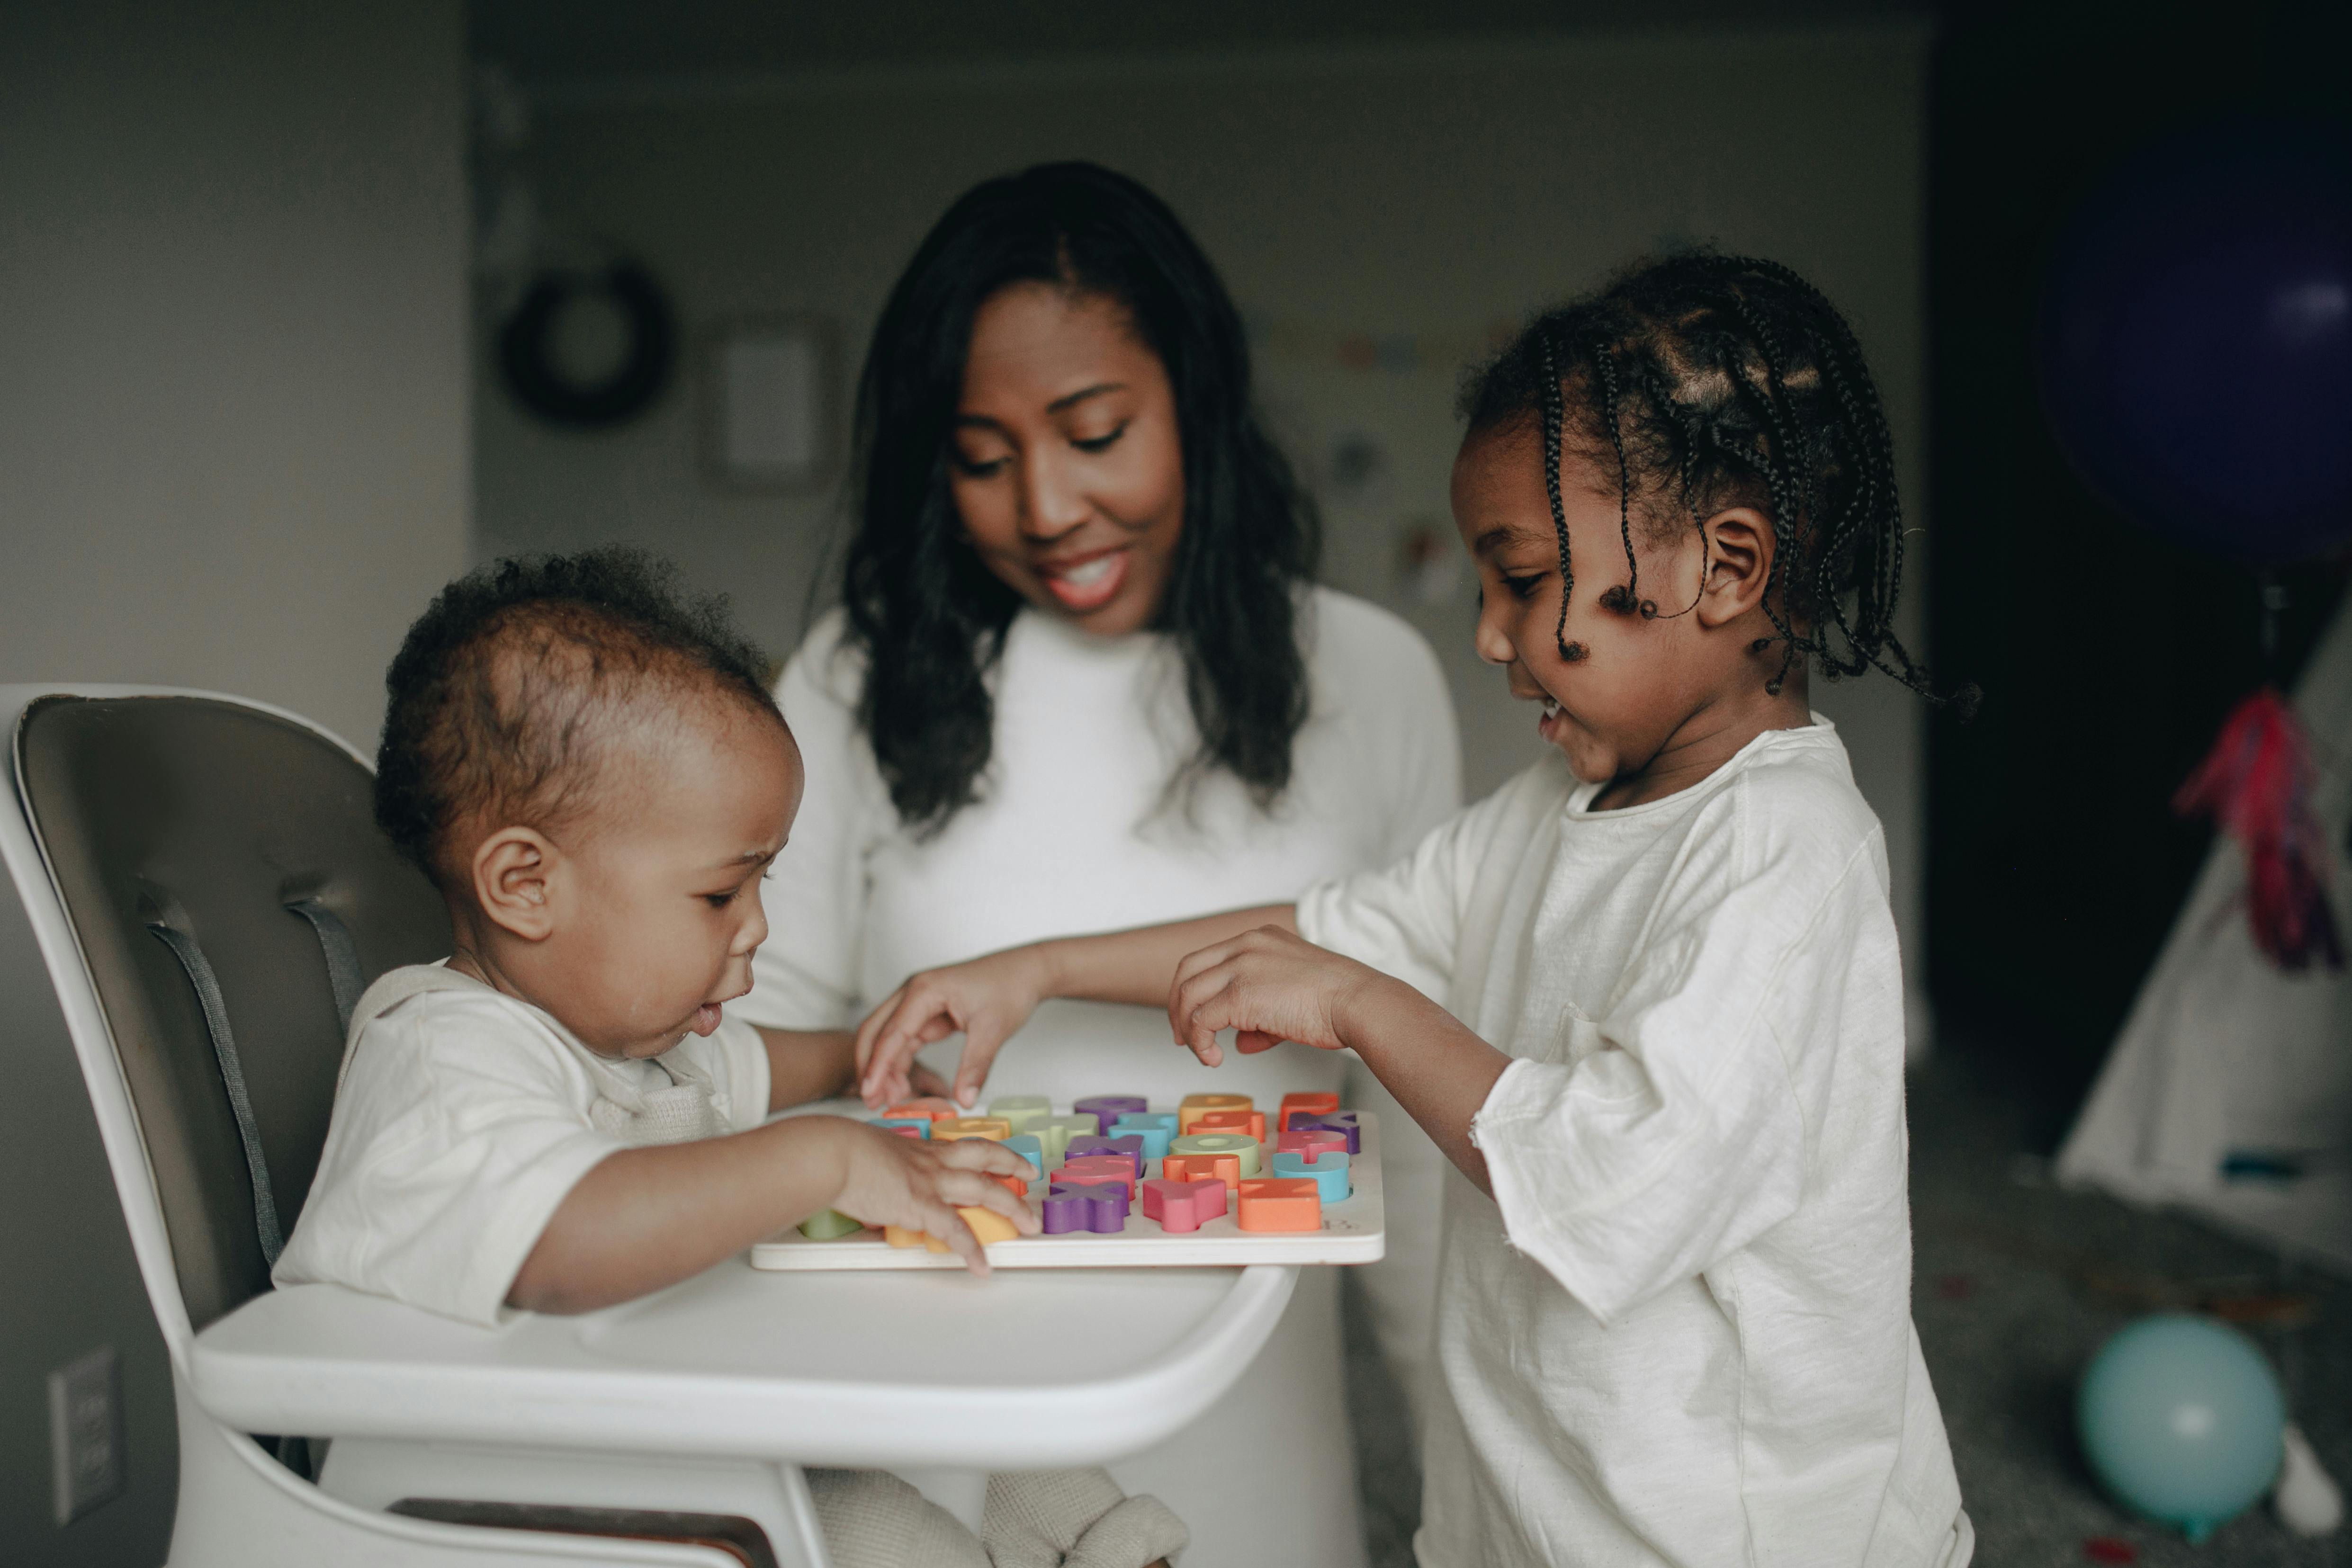 A mother with two young children | Source: Pexels